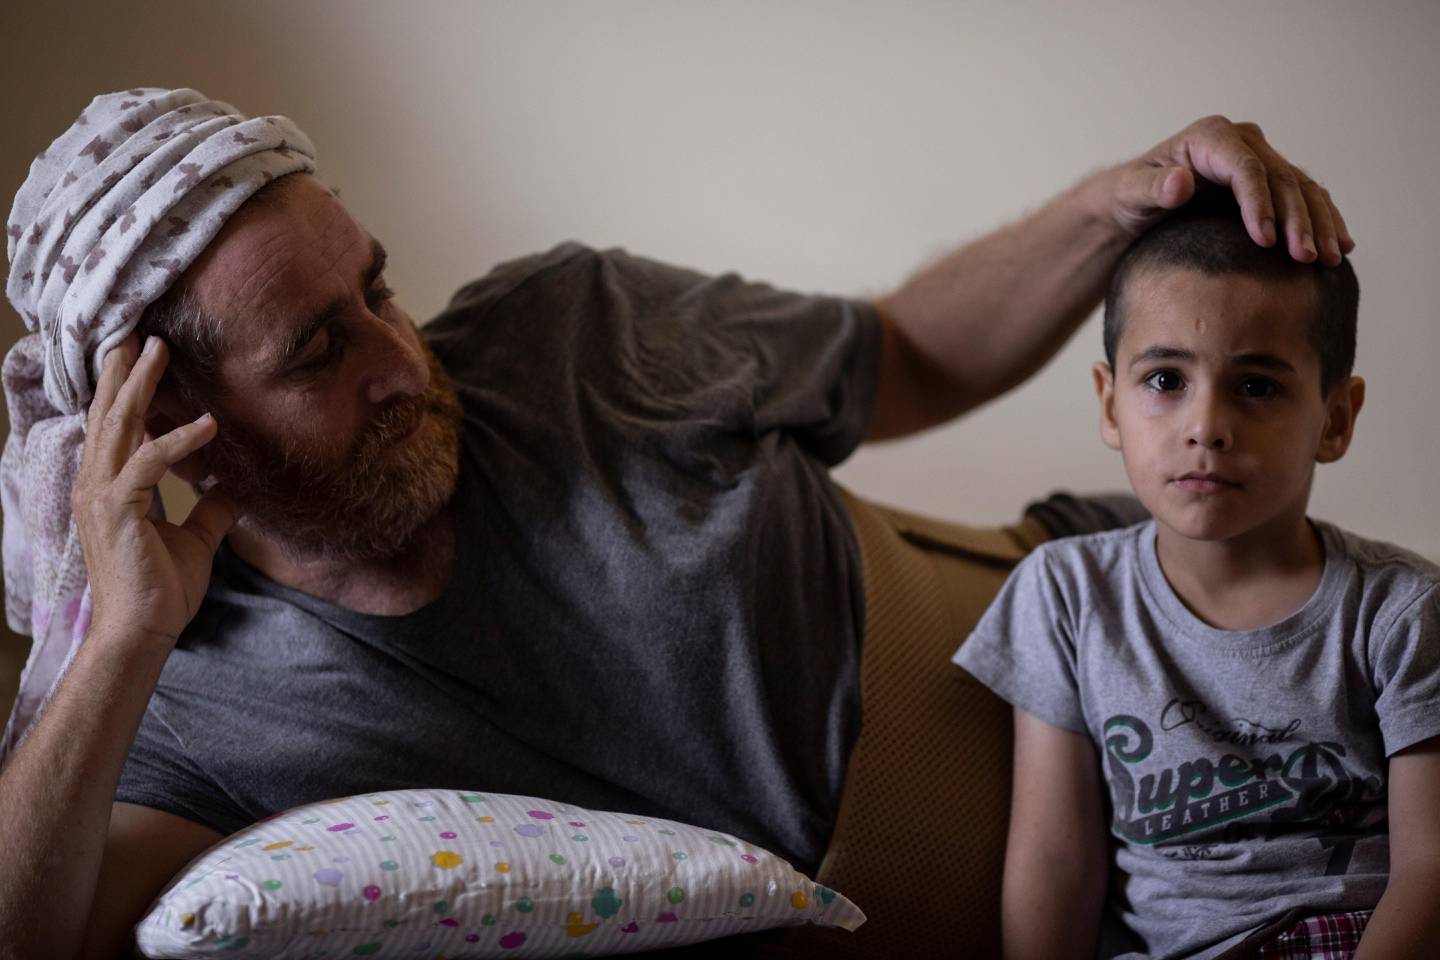 Ali Kinno comforts his son Ahmad at a temporary apartment in the coastal town of Jiyeh, south of Beirut, Lebanon, Tuesday, Sept. 15, 2020. The Kinno family from Syria's Aleppo region was devastated in the wake of the Aug. 4 explosion at the Beirut port -- Hoda, 11, suffered a broken neck and other injuries and her sister Sidra, 15, died in the explosion. (AP Photo/Hassan Ammar)